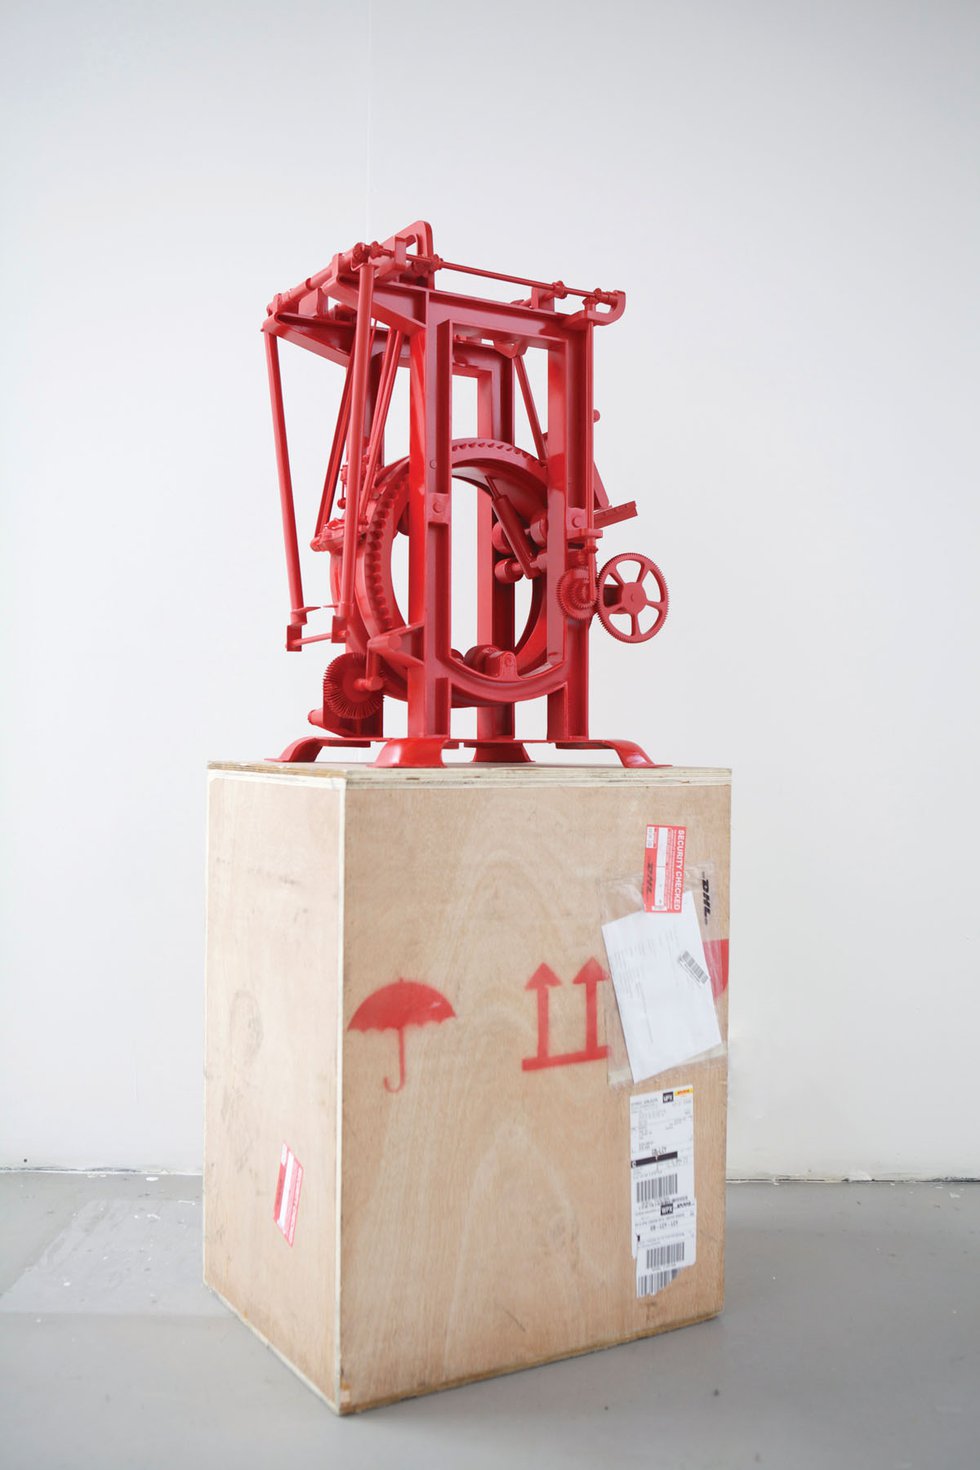 Tommy Ting, “Machine" (Iron Chink, invented in 1903, found at the Gulf of Georgia Cannery in Steveston, B.C., refabricated in Beijing), 2012